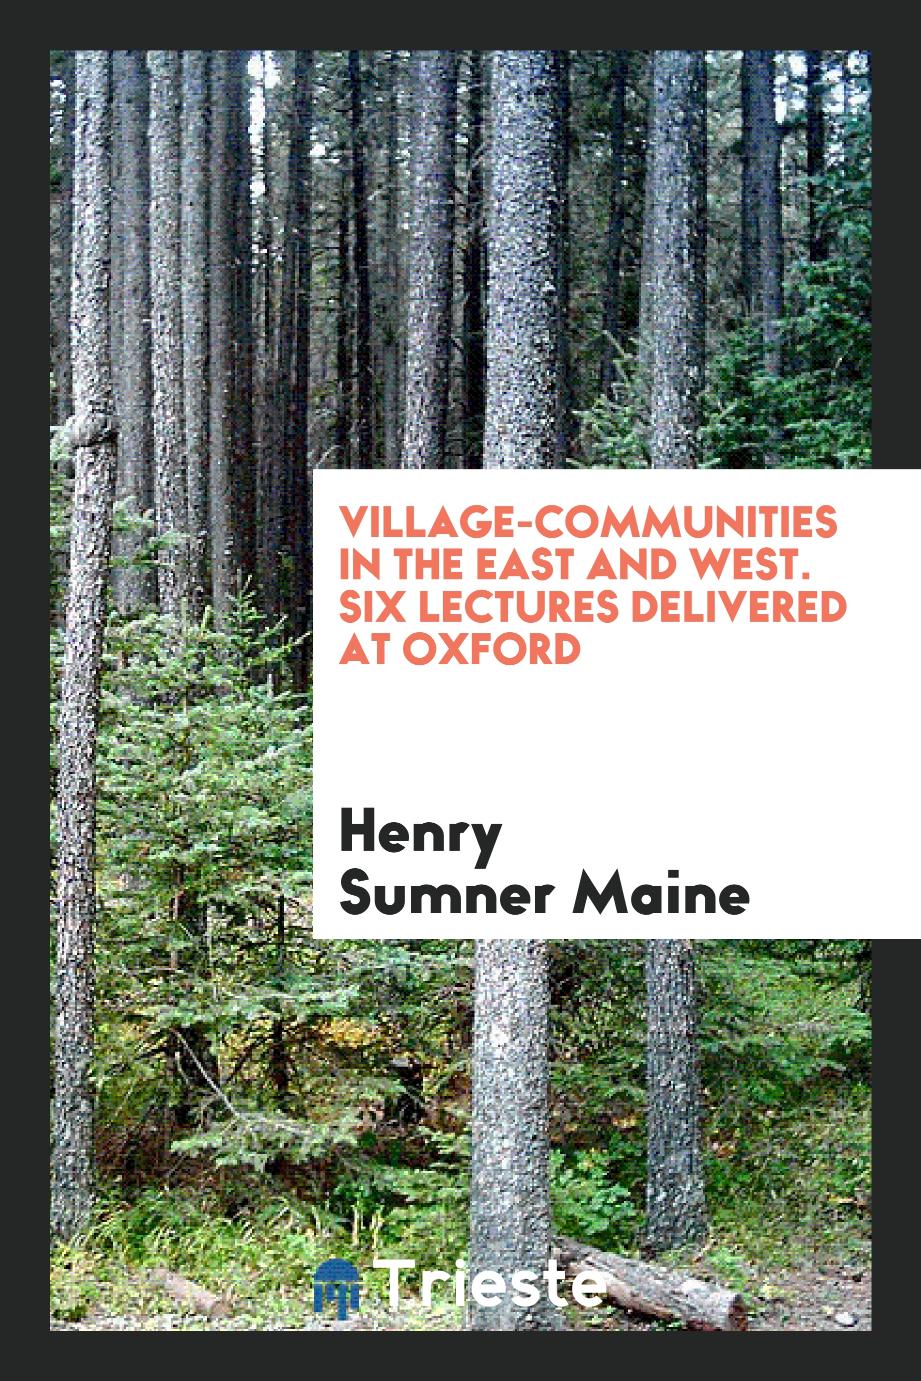 Village-communities in the East and West. Six lectures delivered at Oxford